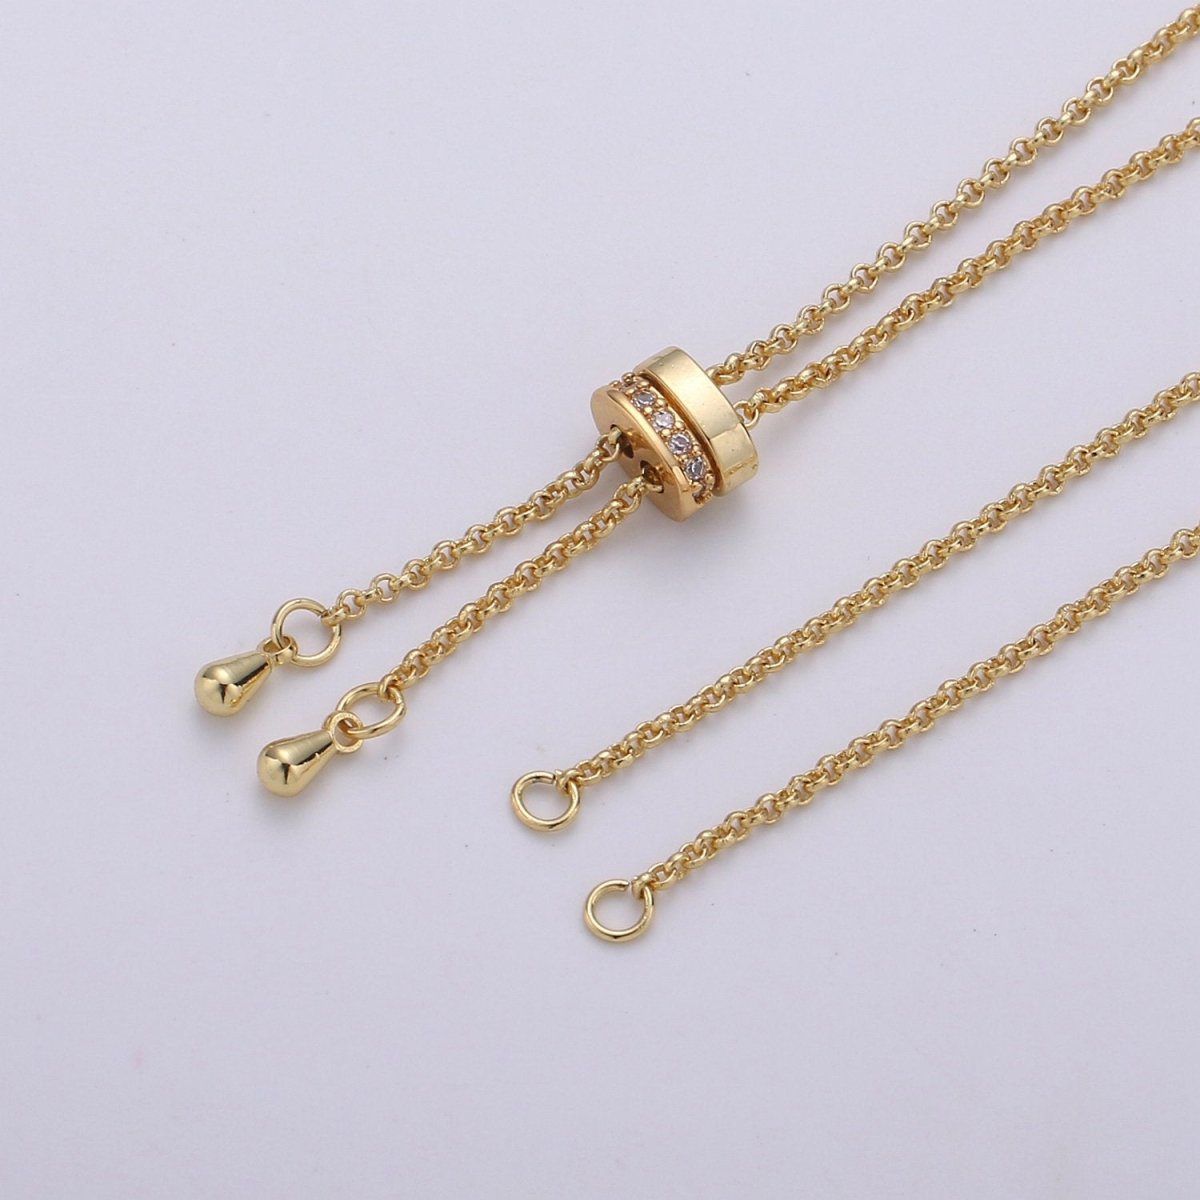 14k Gold Filled Adjustable Necklace Half finished Chain Necklace with rubber stopper Rose Gold, Silver, Black Rolo Chain Wholesale 1pc/10pcs K-520 - K-523 - DLUXCA